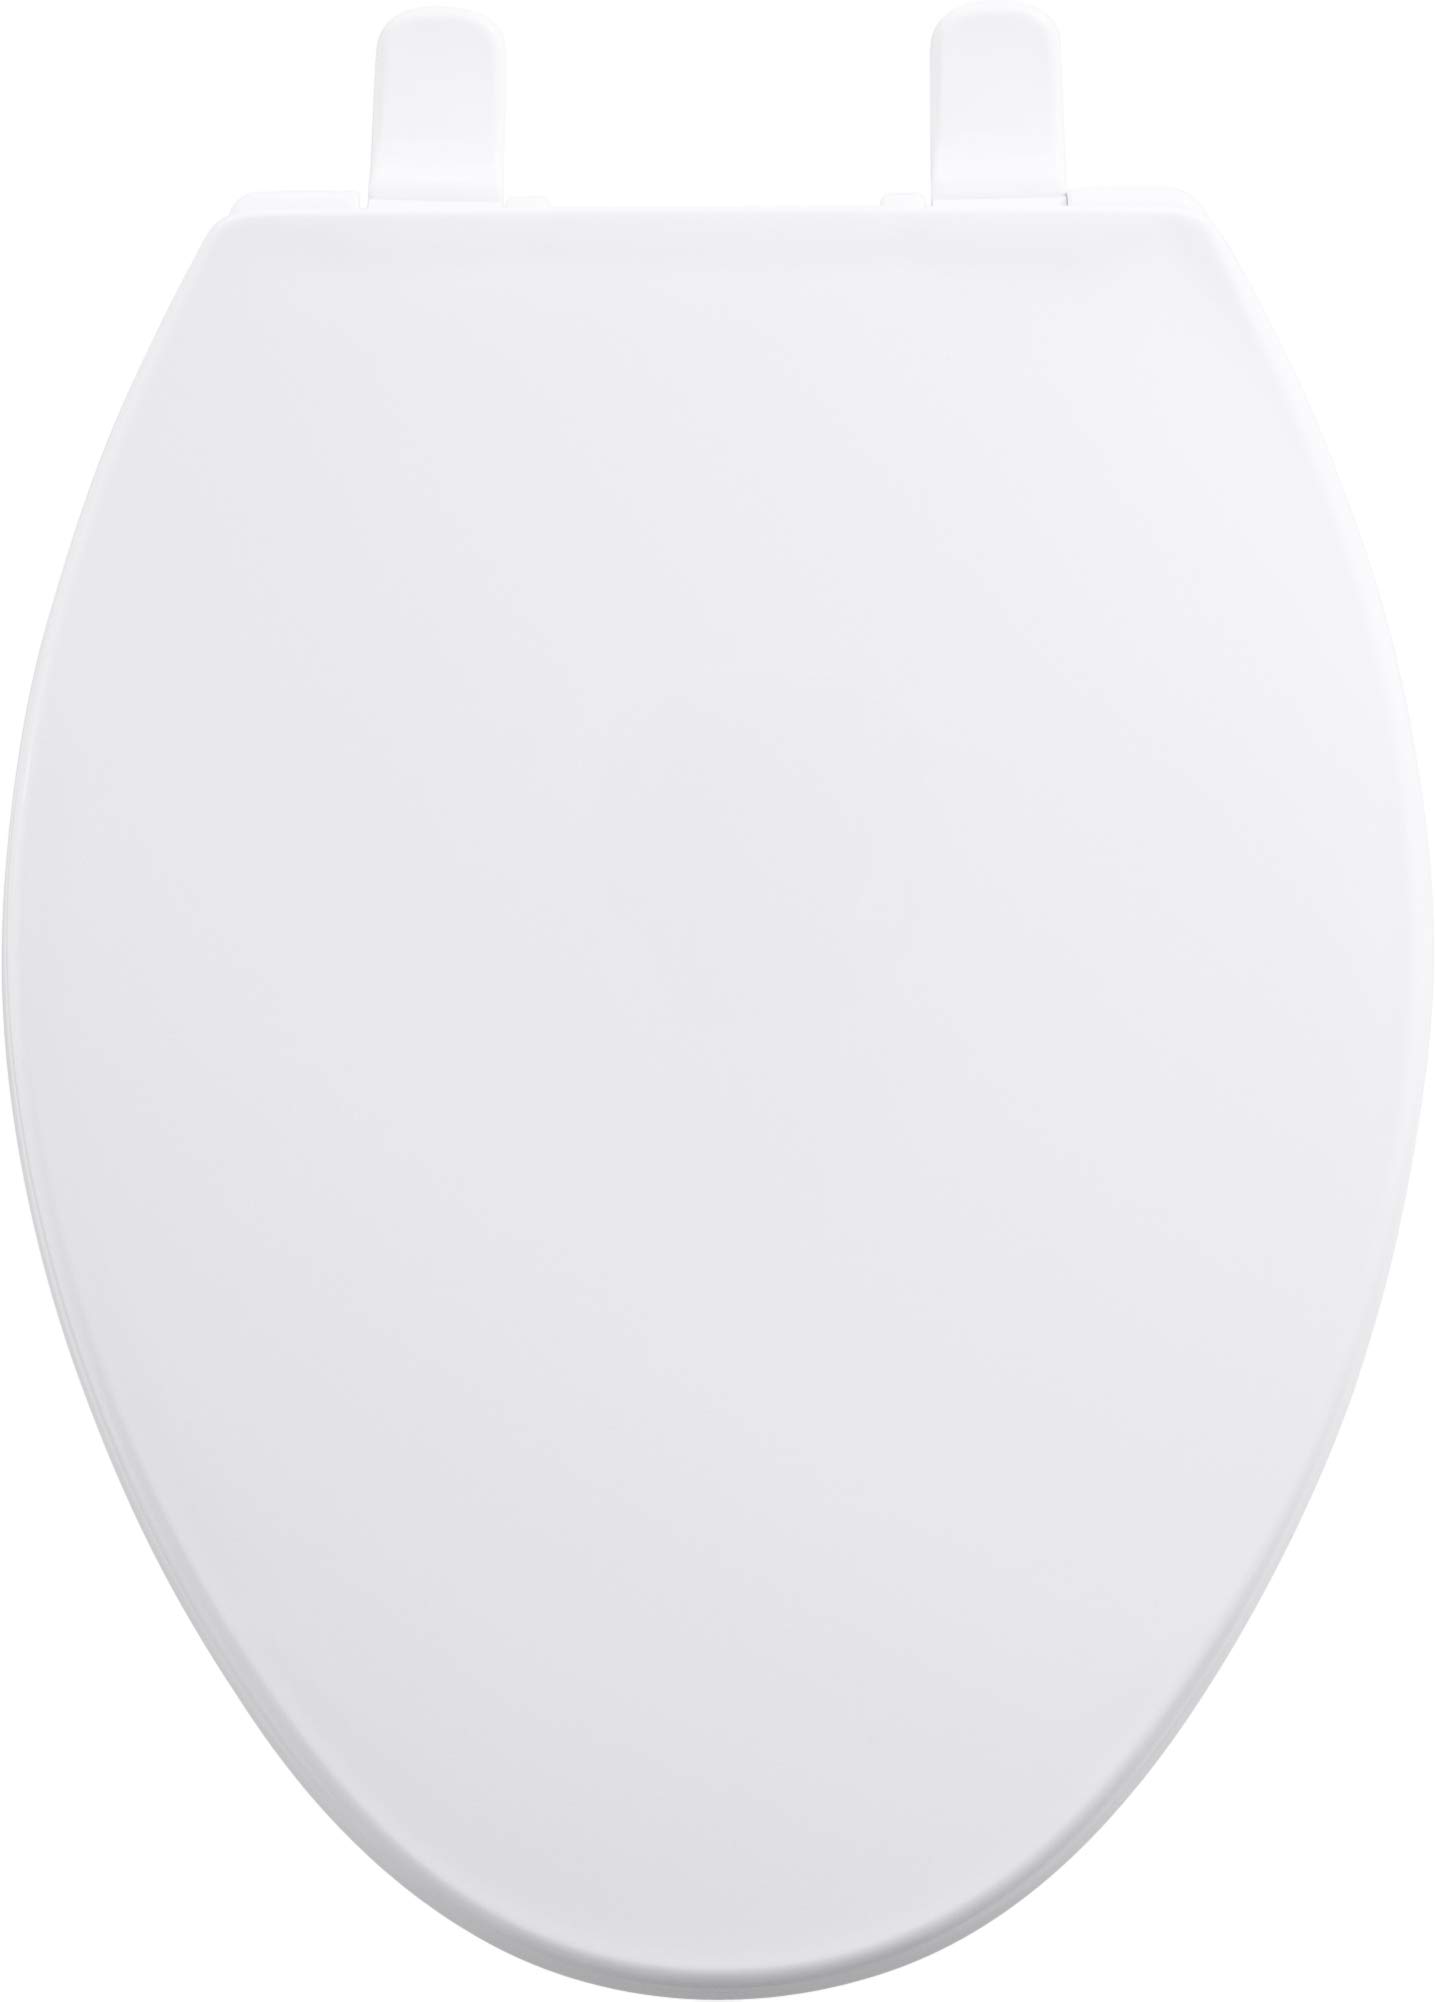 Kohler K-4774-0 Brevia Elongated White Toilet Seatwith Quick-Release Hinges And Quick-Attach Hardware For Easy Clean